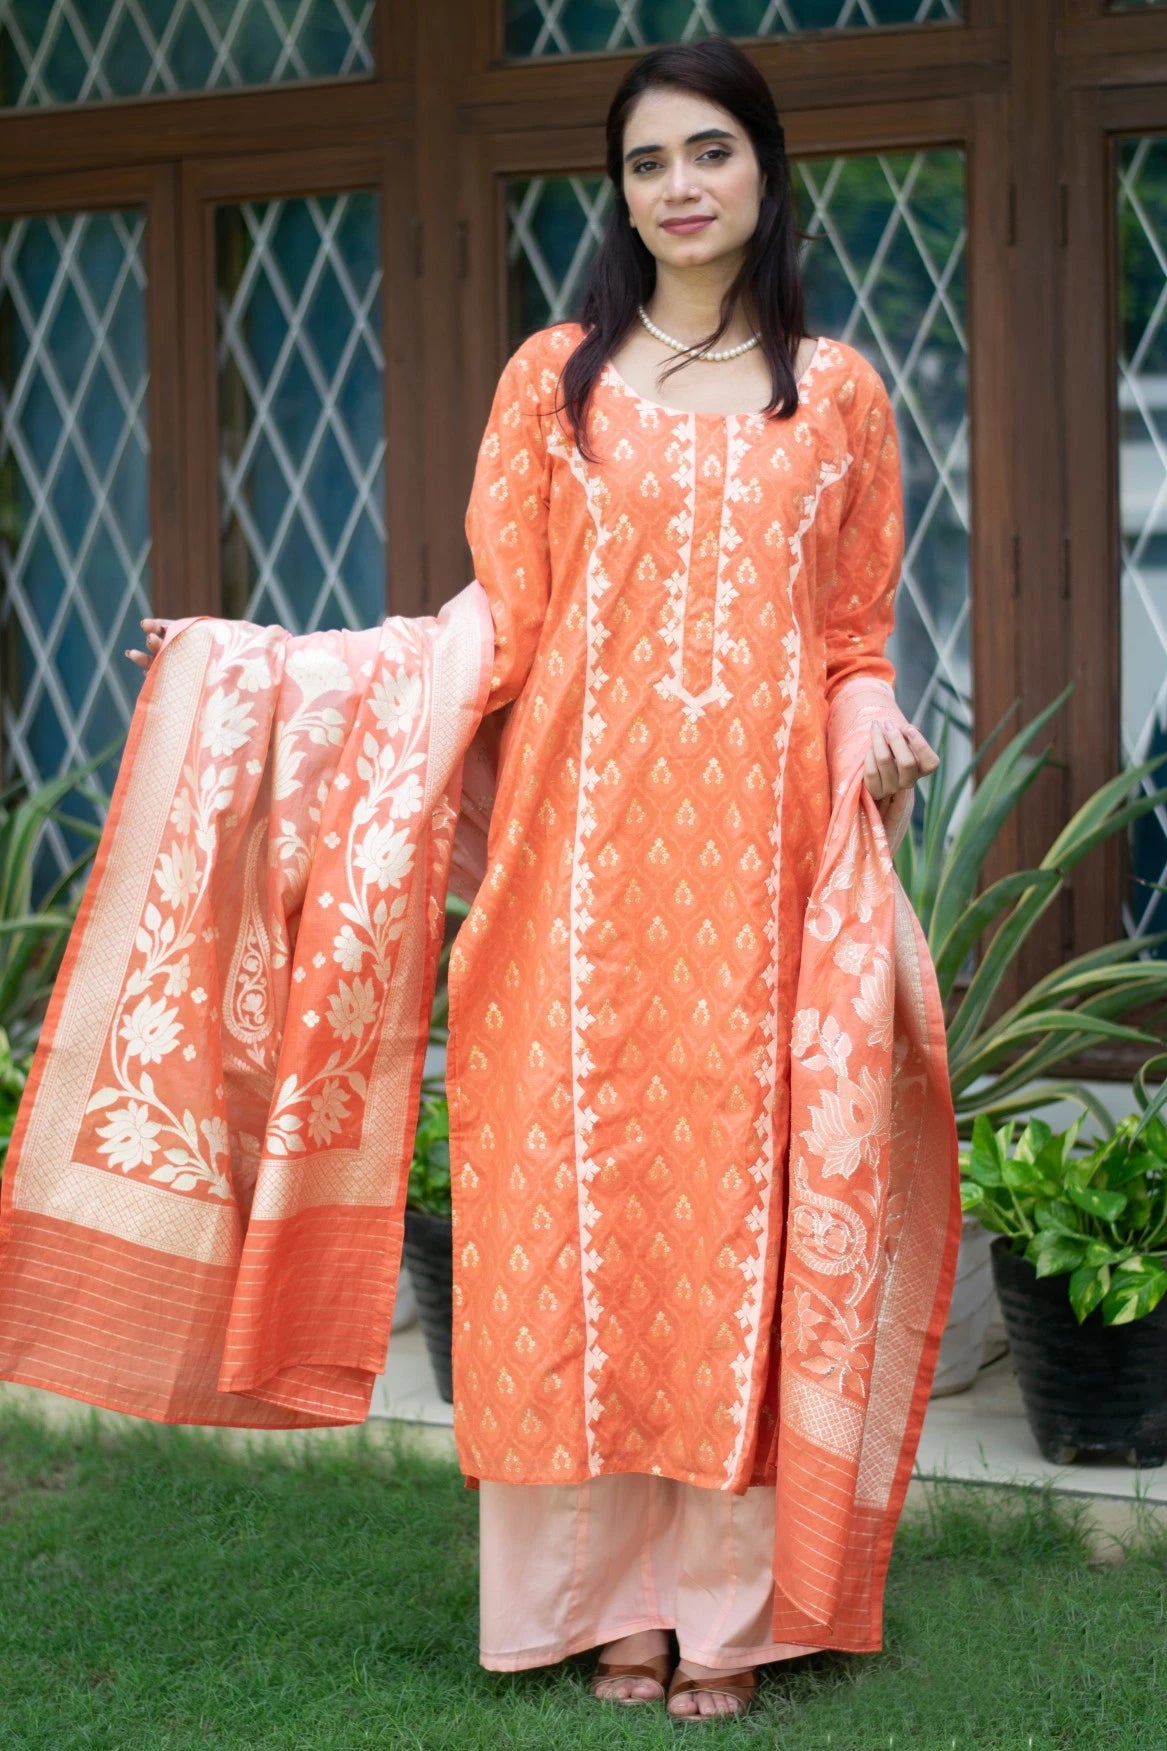 An image of a woman in traditional attire donning a silk kurta and trousers